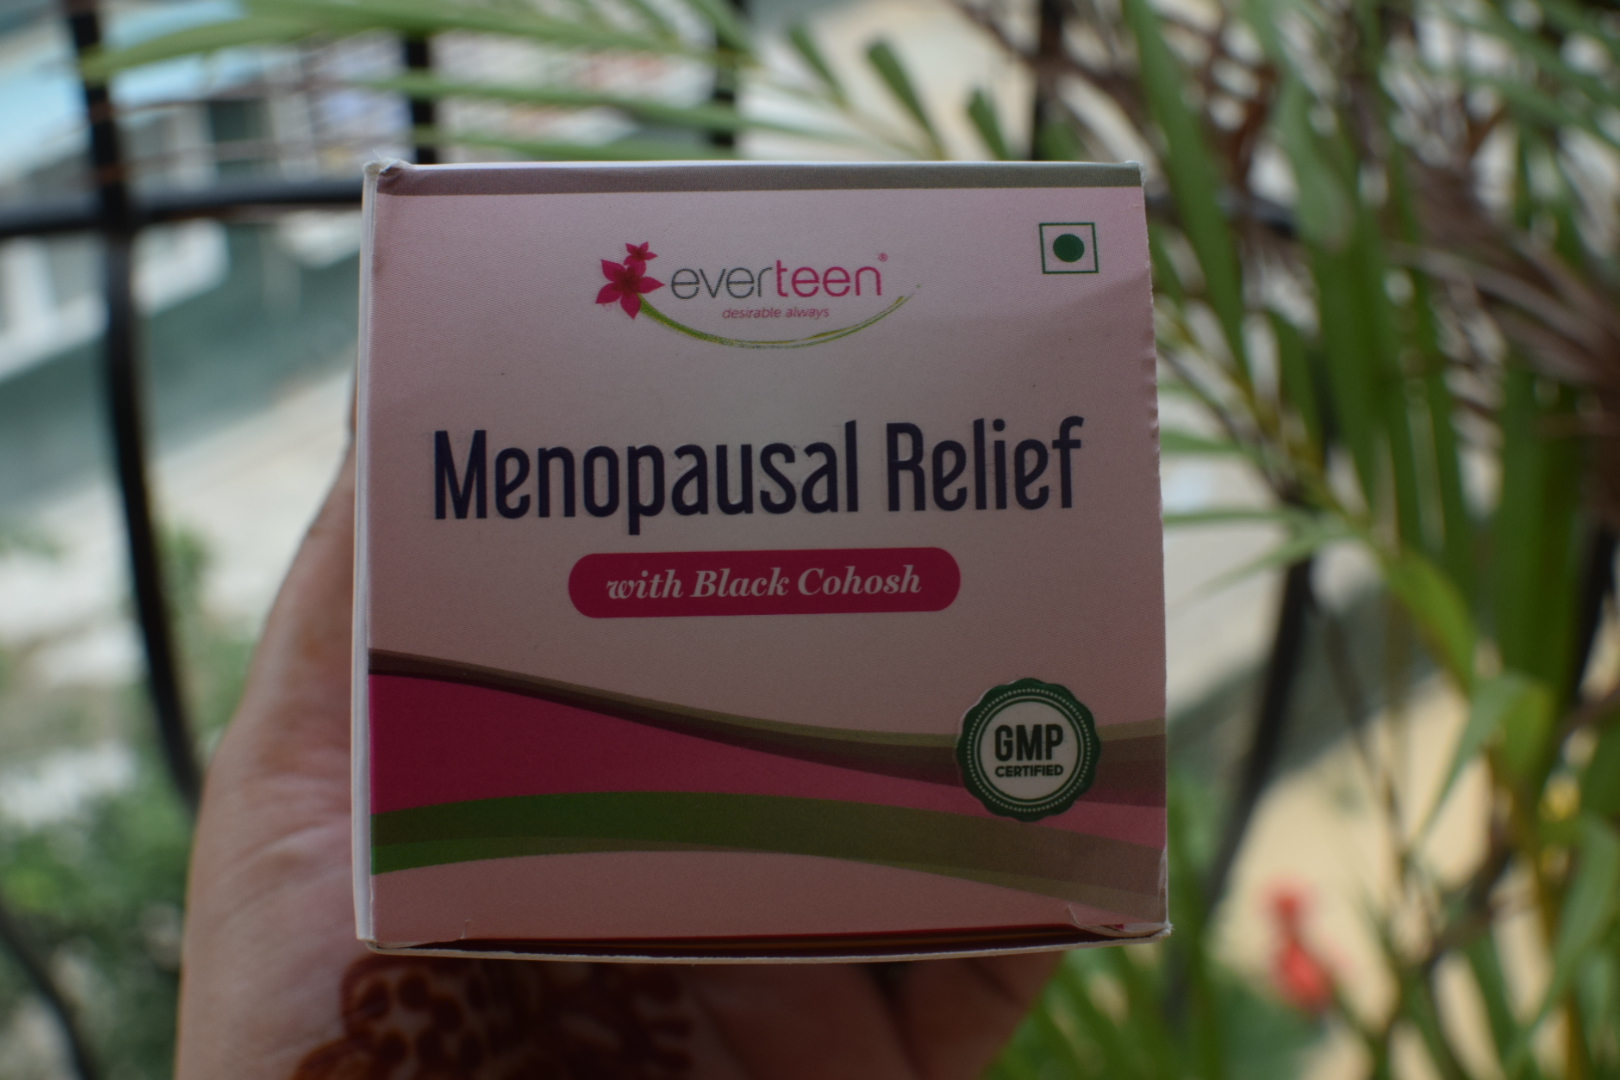 Everteen Menopausal Relief Natural Capsules With Black Cohosh Review